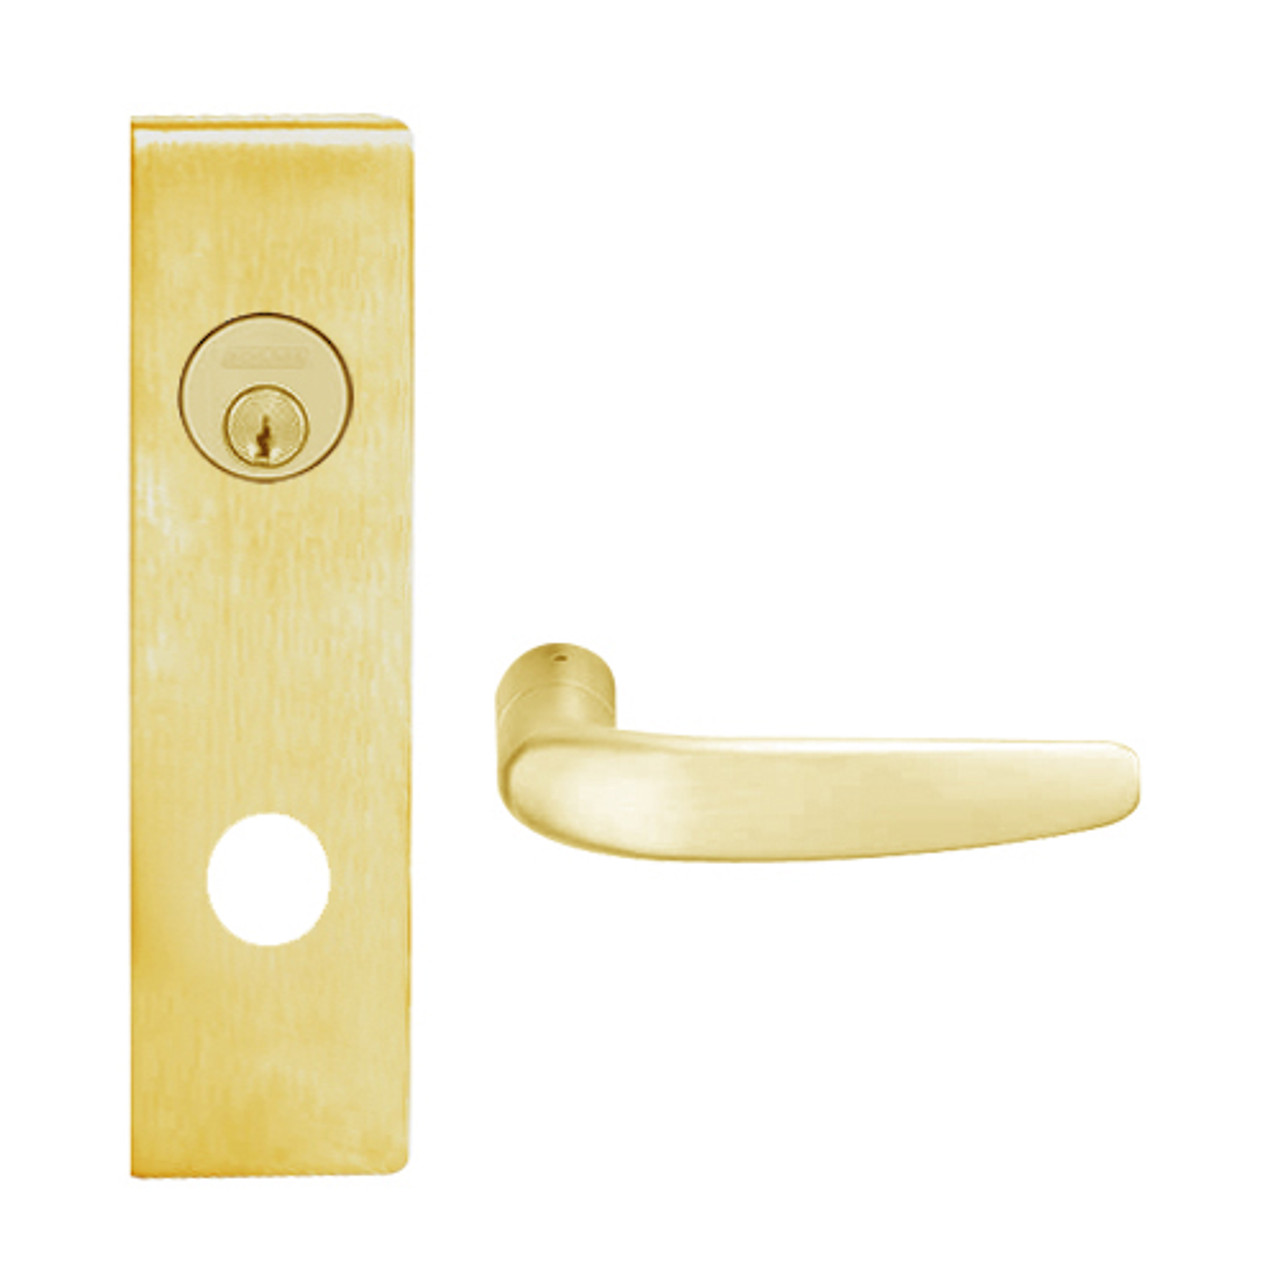 L9456L-07N-605 Schlage L Series Less Cylinder Corridor with Deadbolt Commercial Mortise Lock with 07 Cast Lever Design in Bright Brass